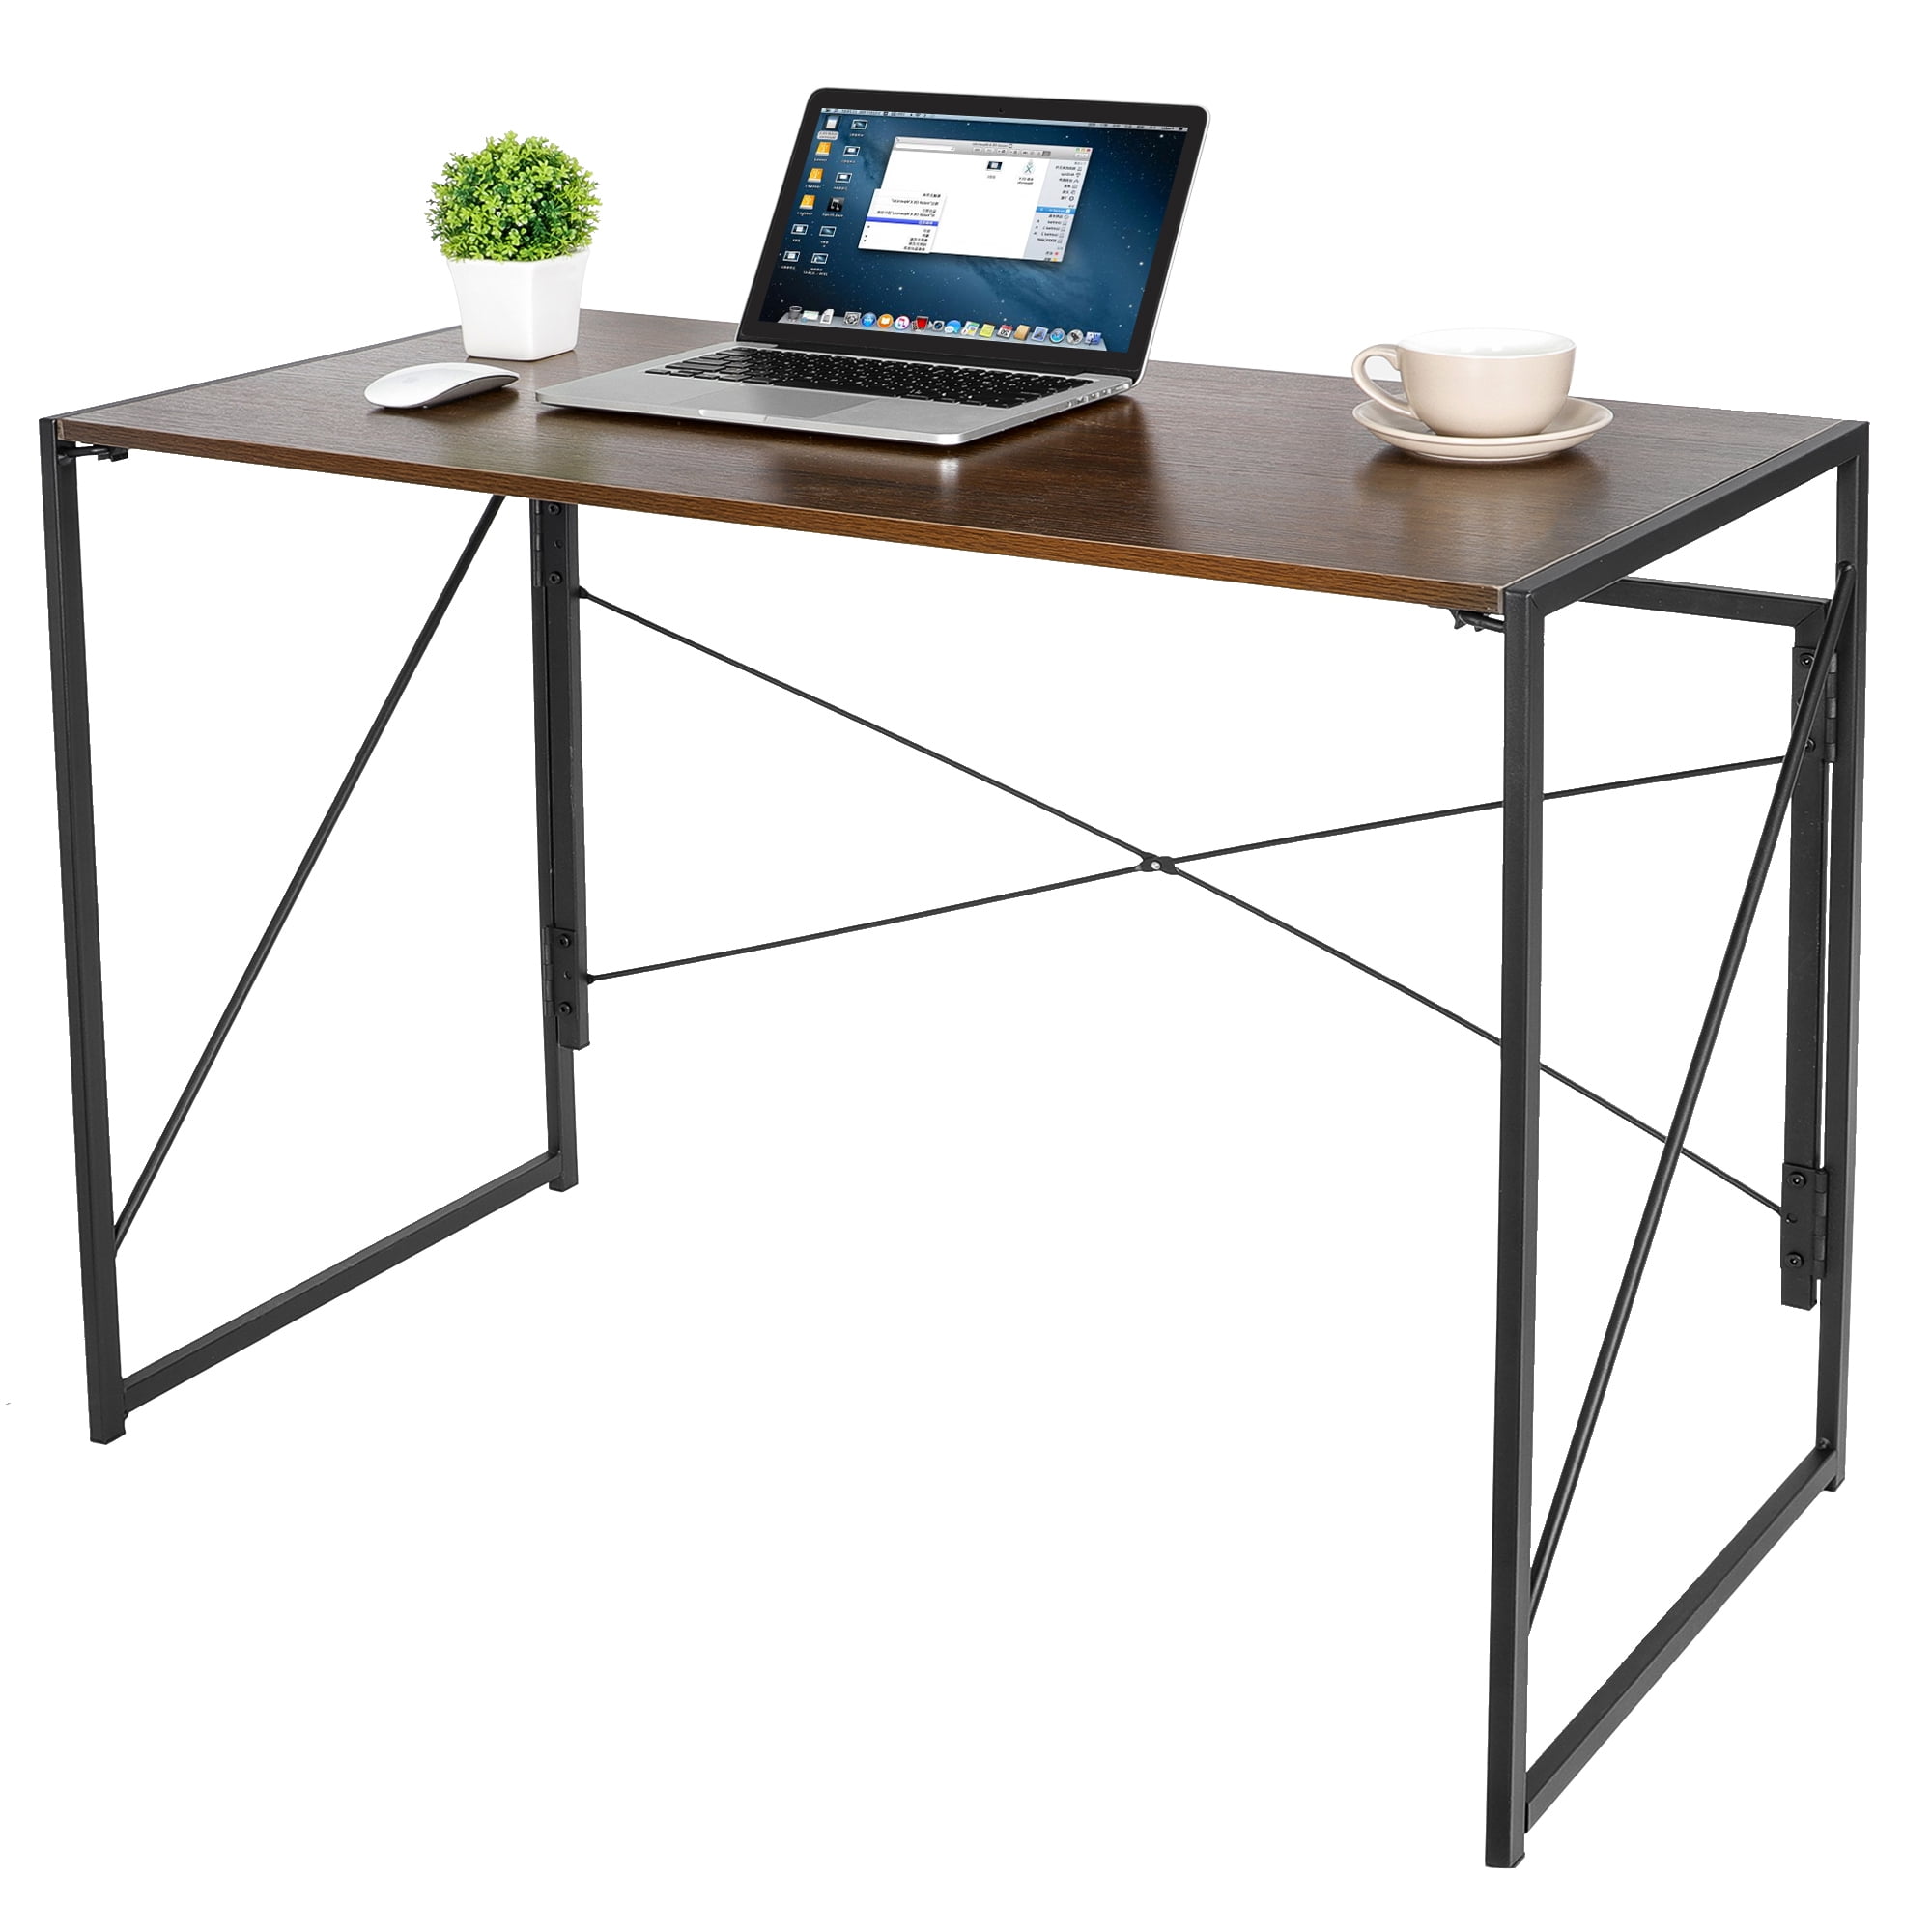 DK Folding Computer Desk Table Laptop PC Writing Study Workstation Home Office 